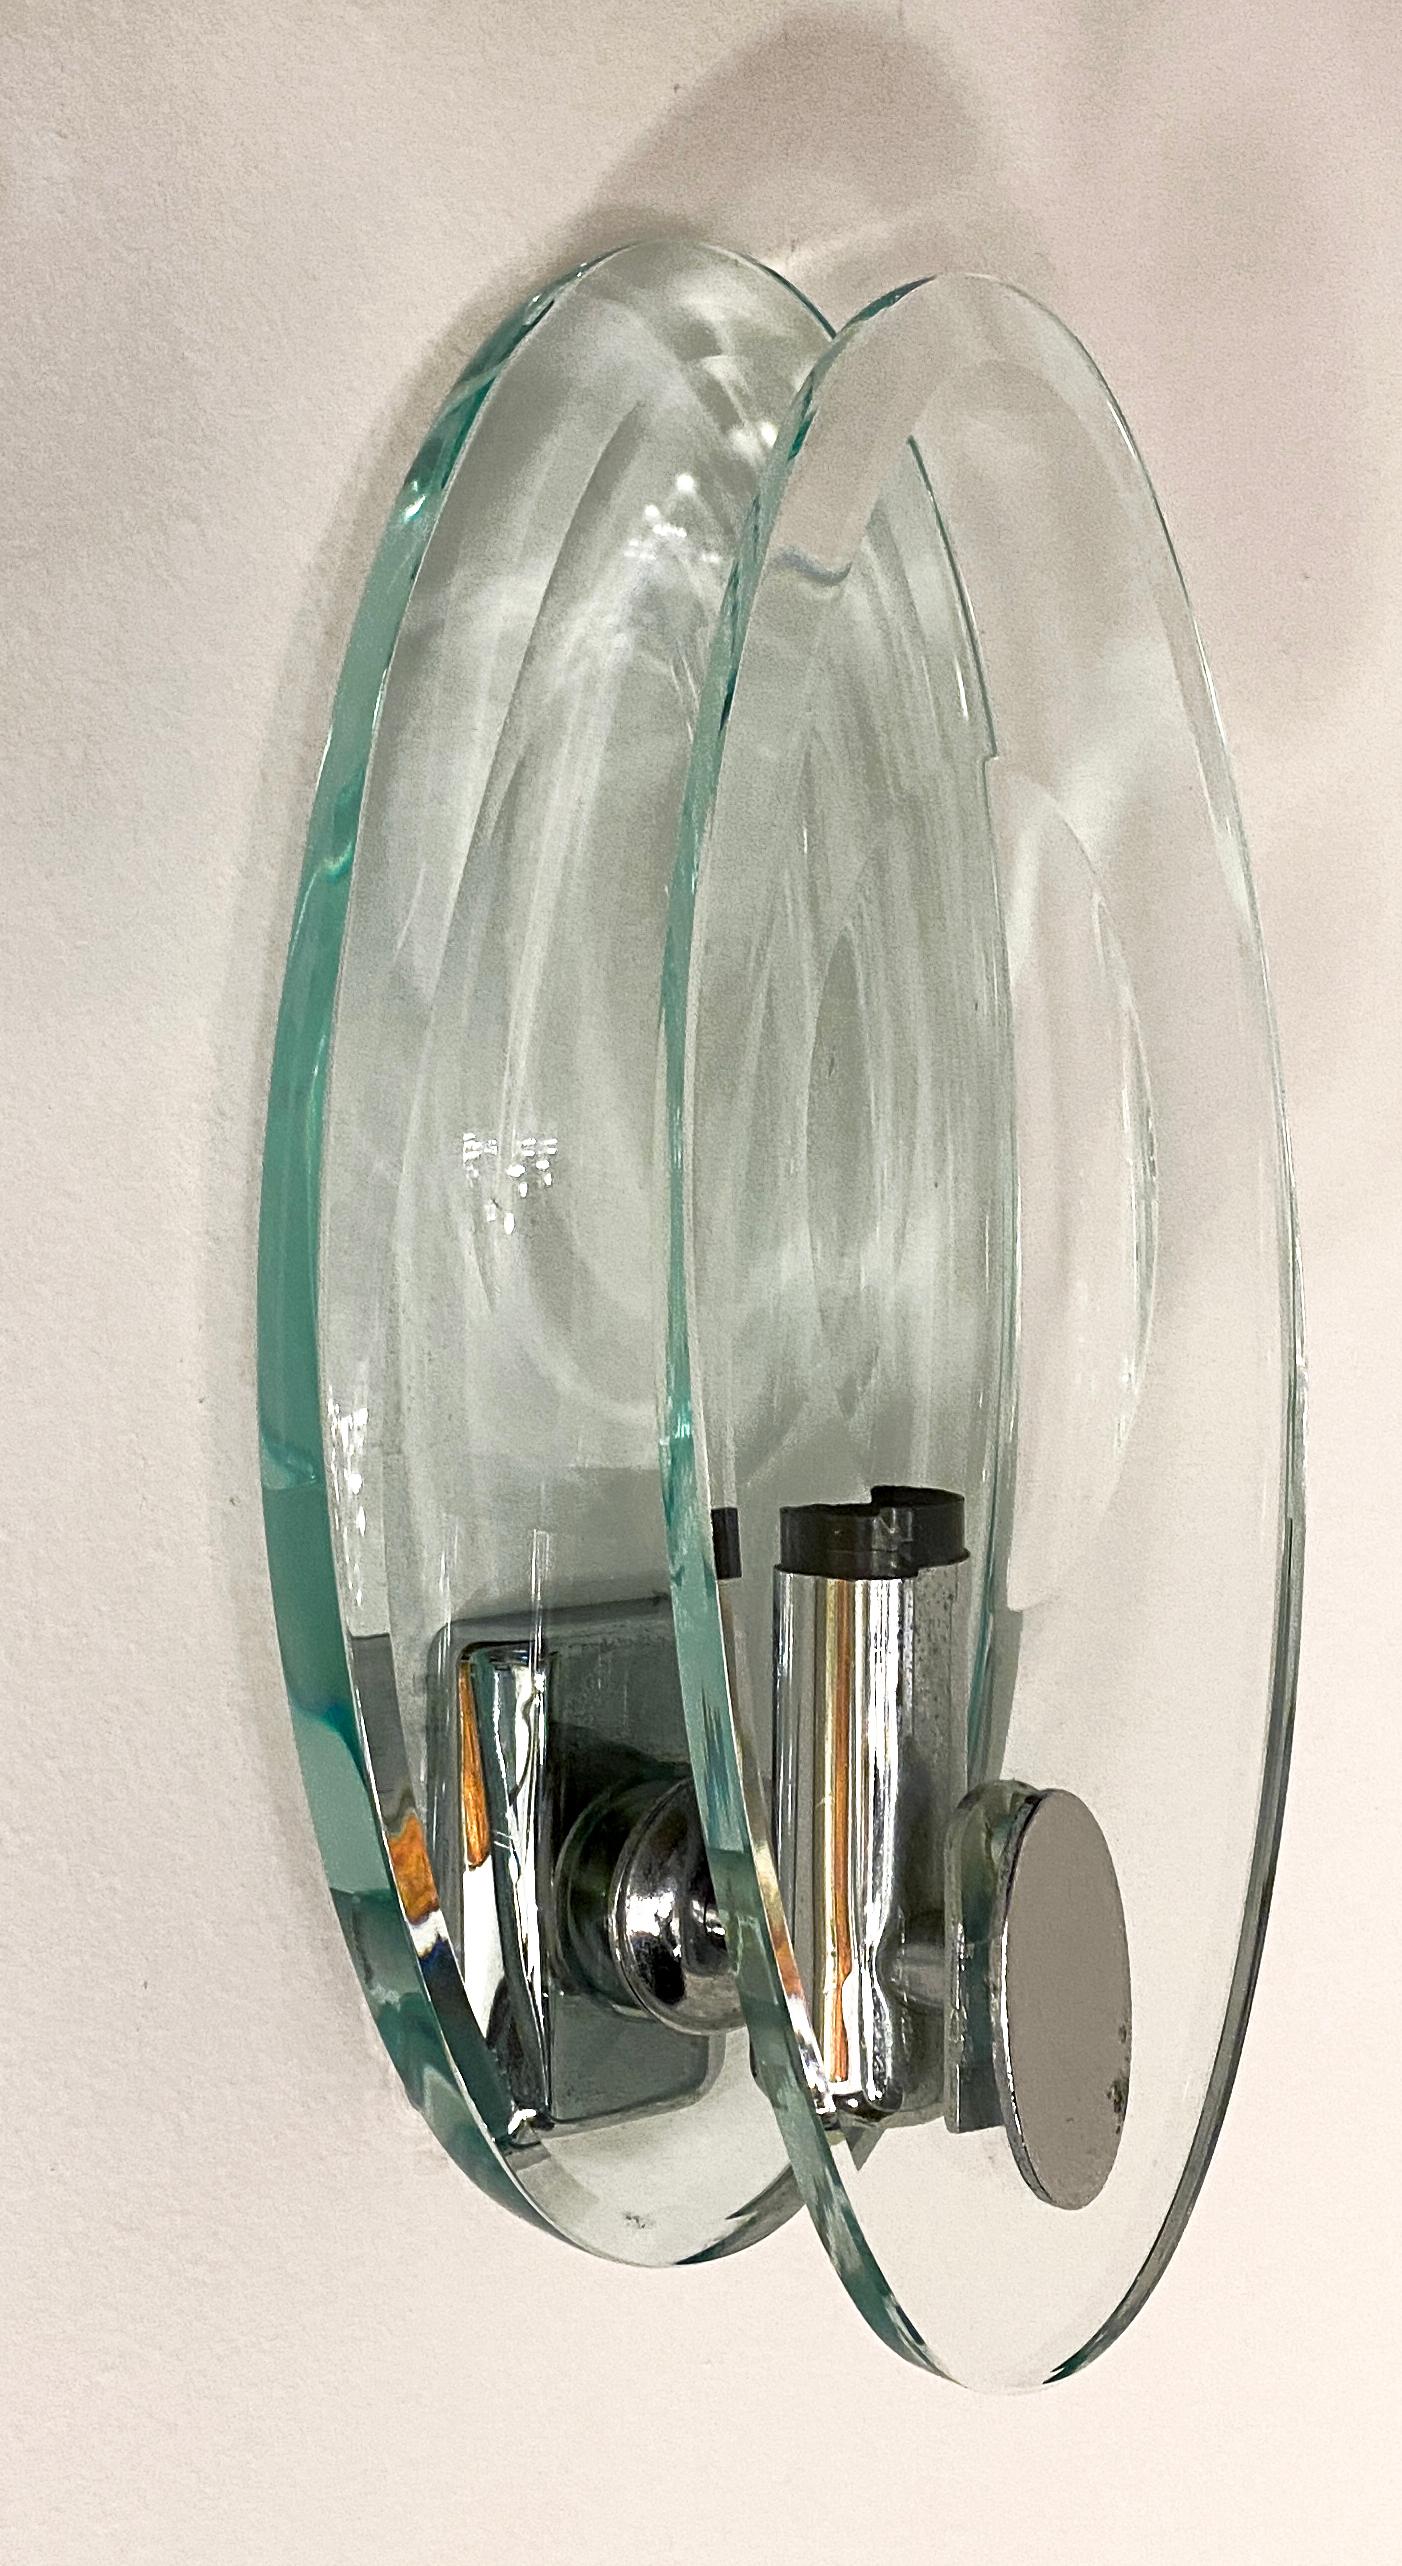 Pair of Italian Modern Glass and Polished Nickel Sconces, Max Ingrand for Fontana In Good Condition For Sale In Hollywood, FL